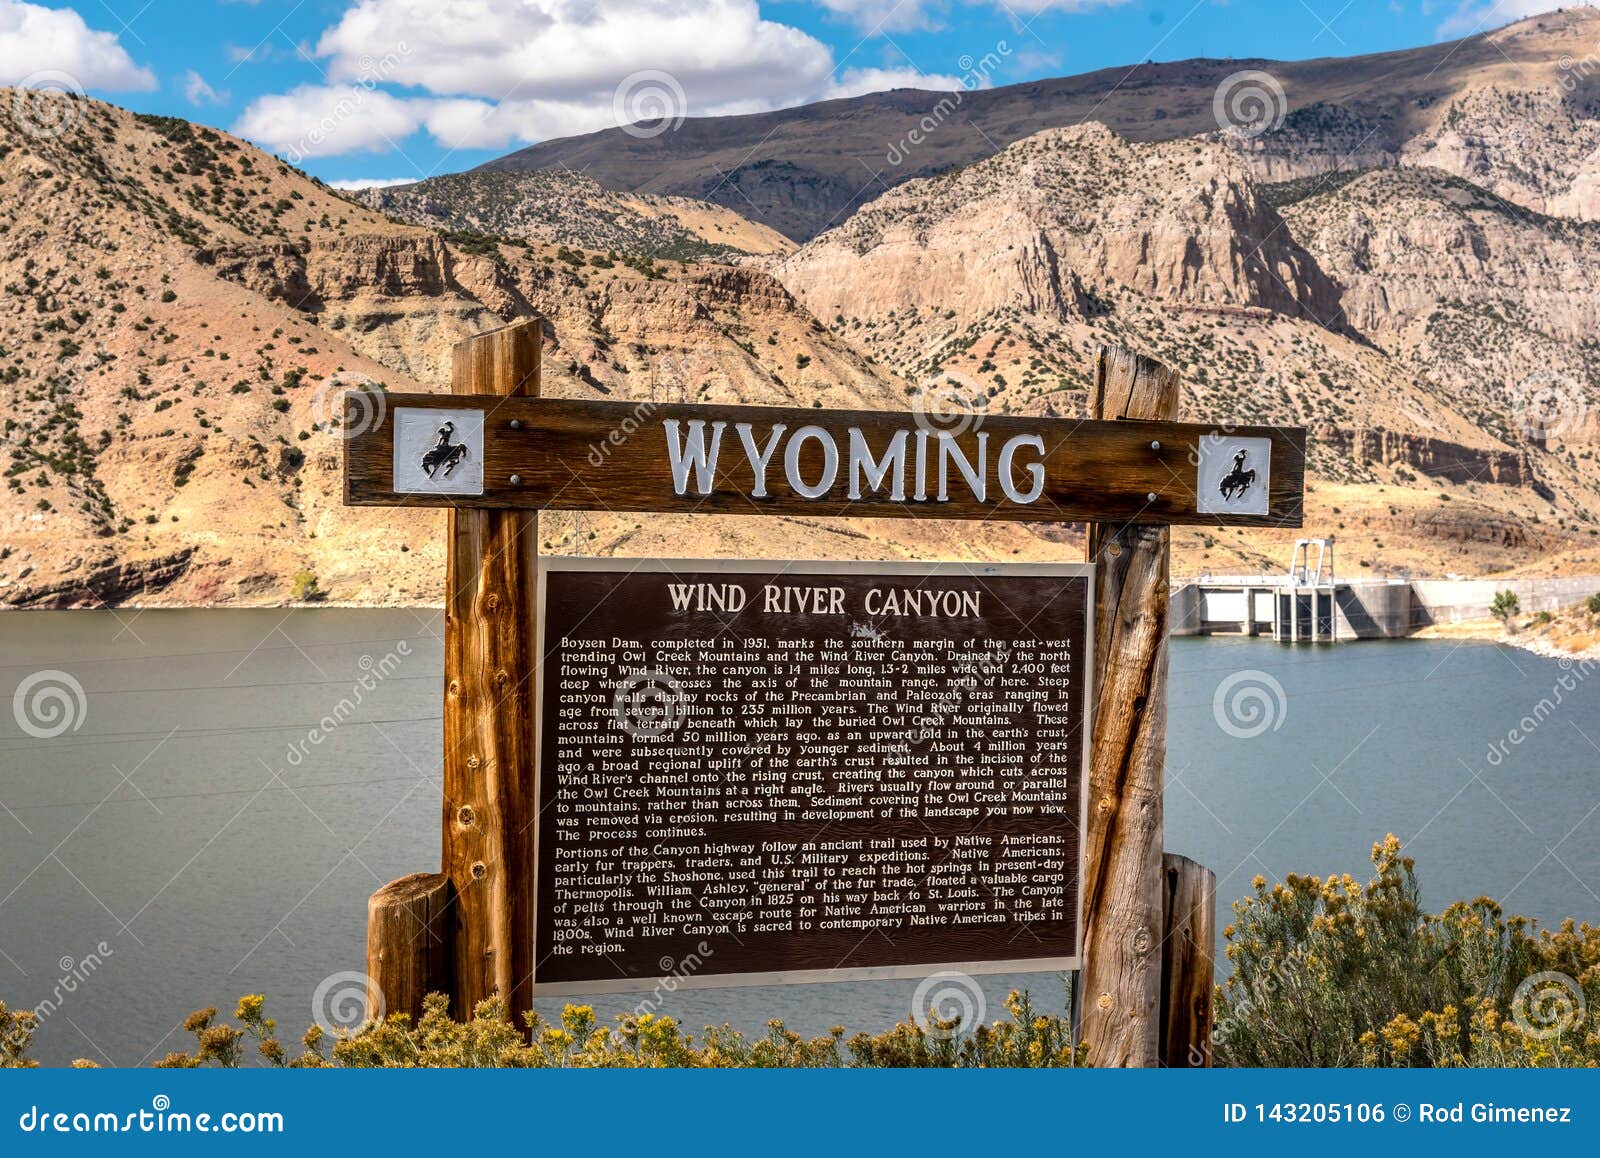 welcome to wyoming sign to wind river canyon